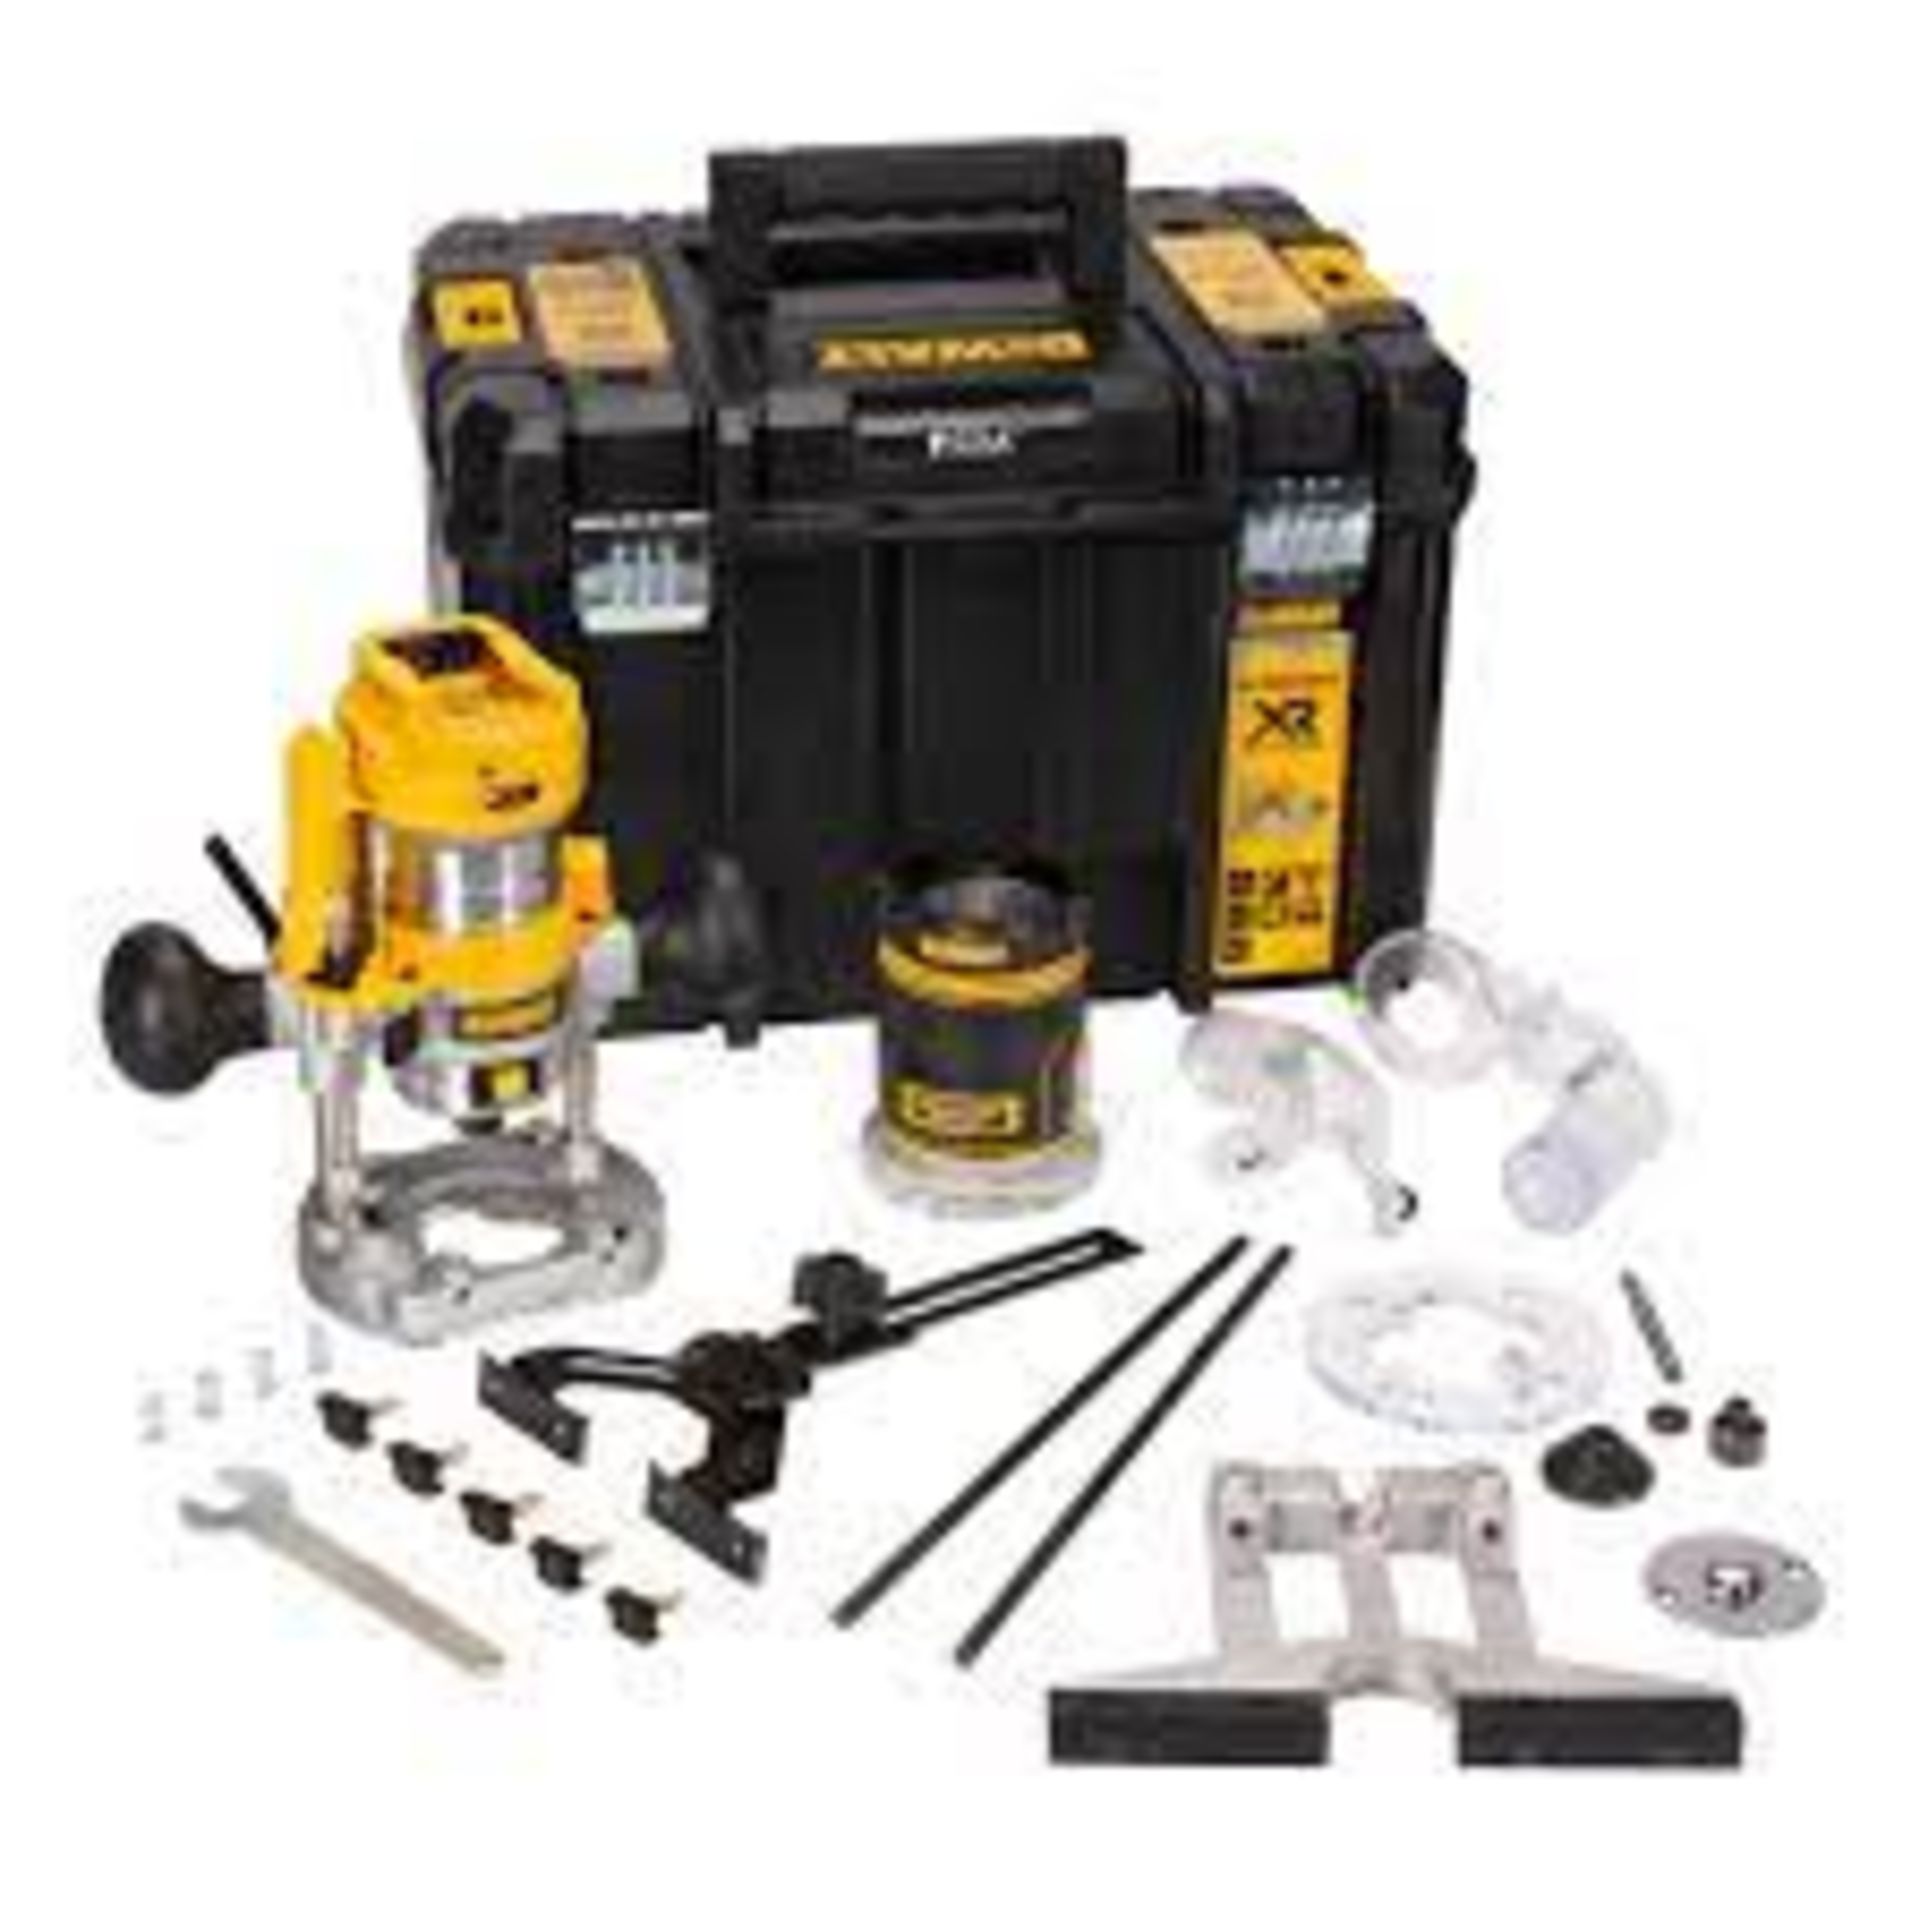 Dewalt DCW604NT 18V XR Li-Ion Cordless Brushless 1/4" Router. - ER46. This router is optimised by